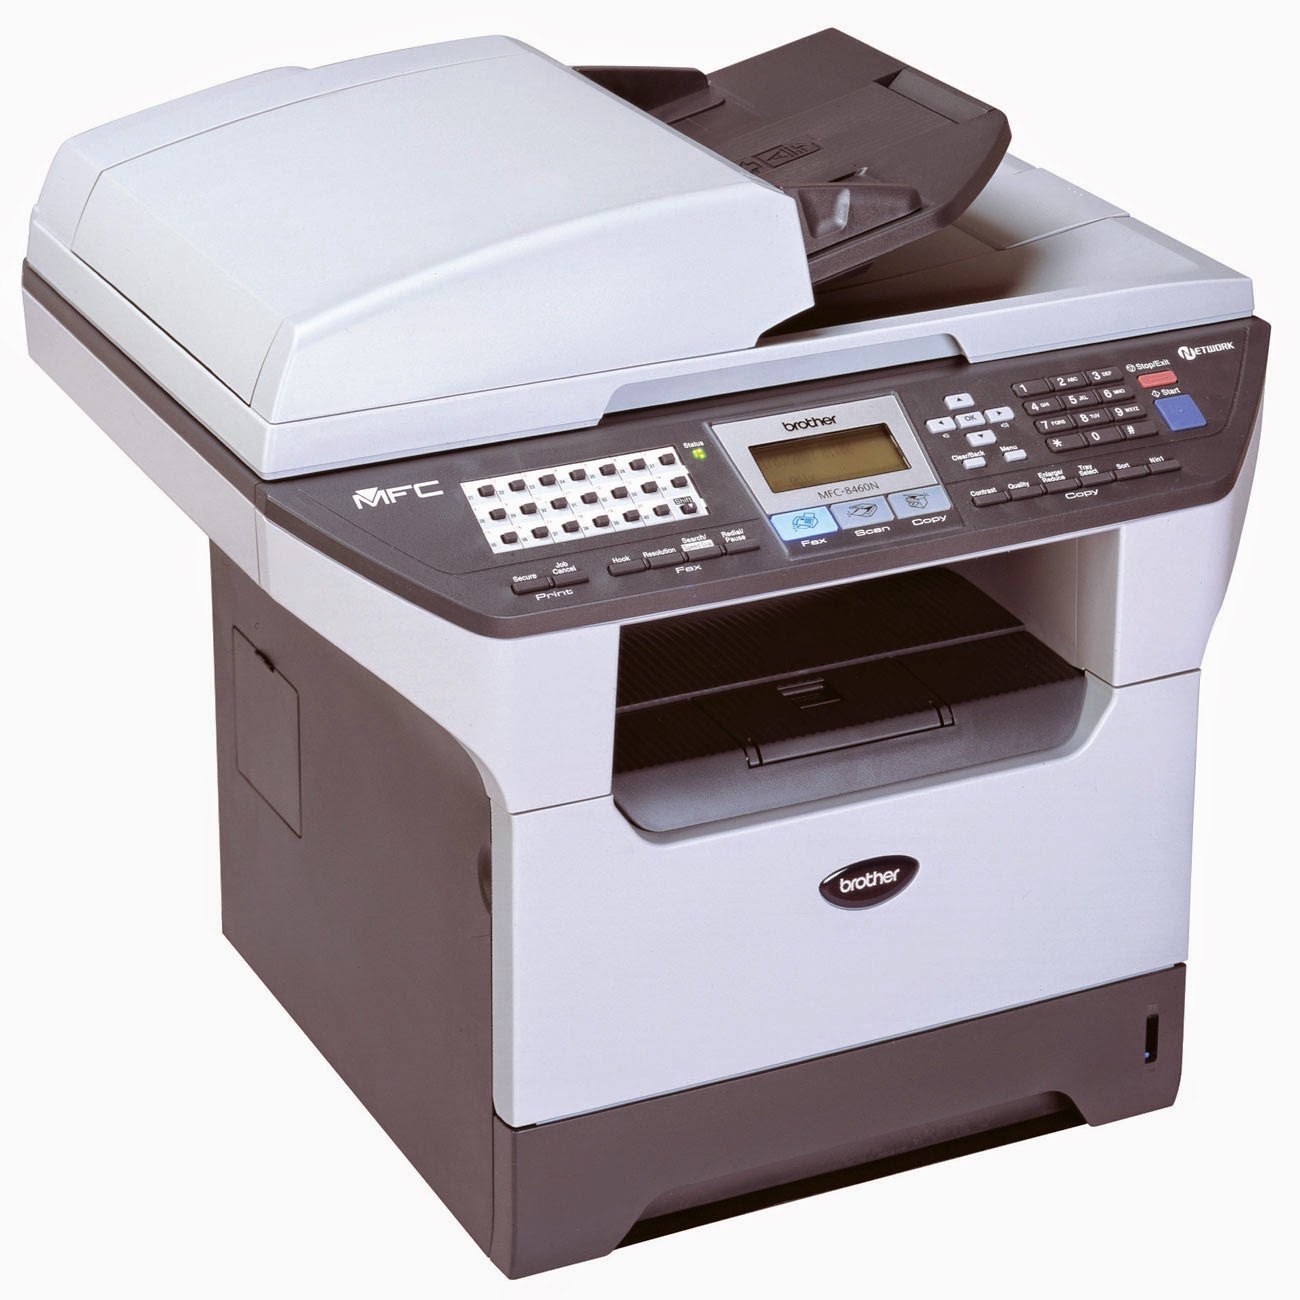 Brother MFC-8460N Driver Download Free | Printer Drivers Support